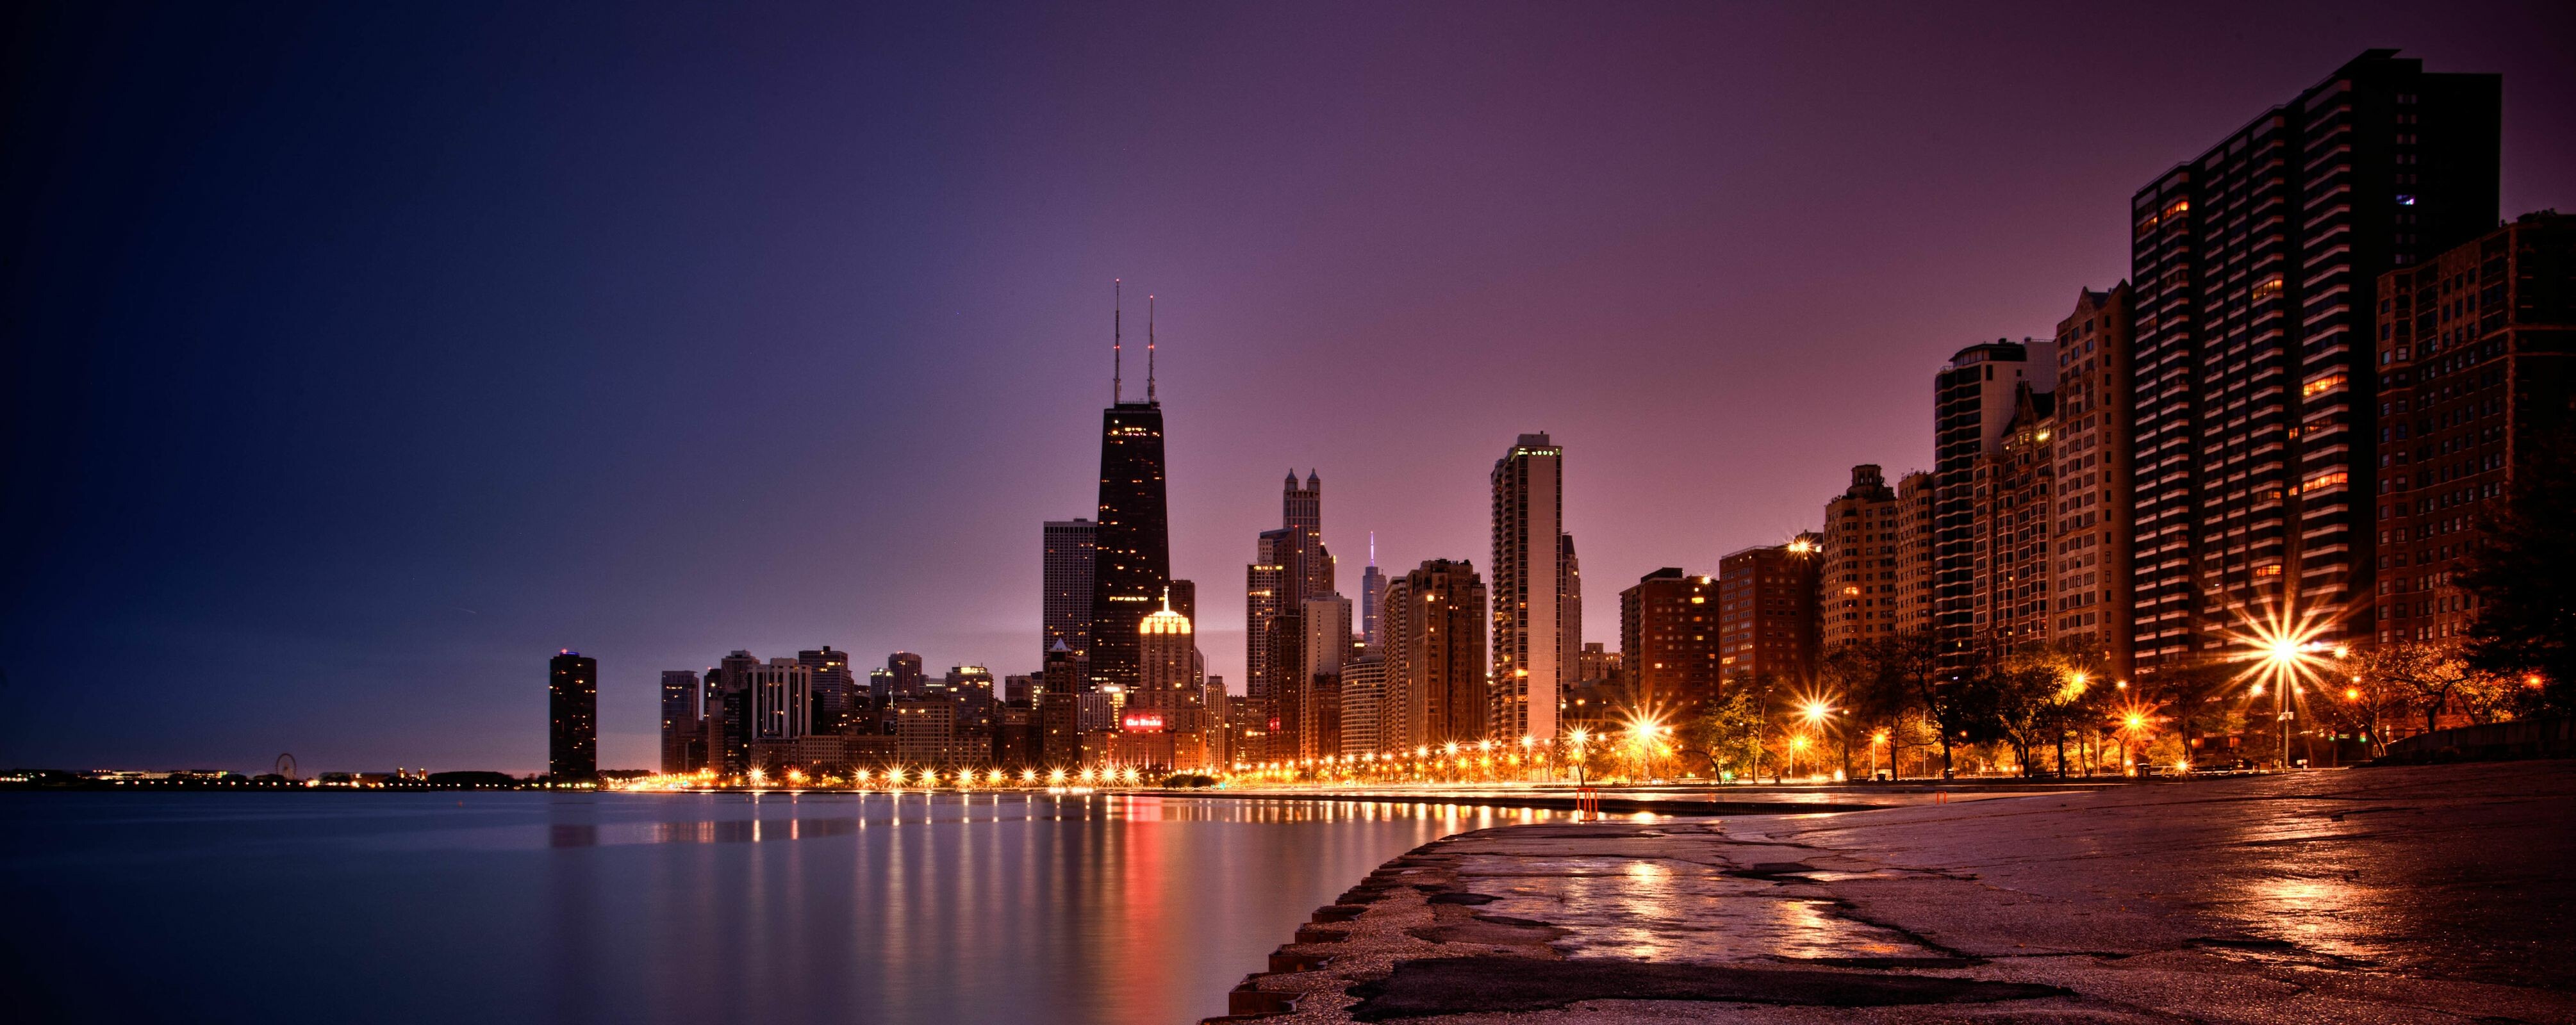 Chicago Night Wallpaper HD City 4K Wallpapers Images and Background   Wallpapers Den